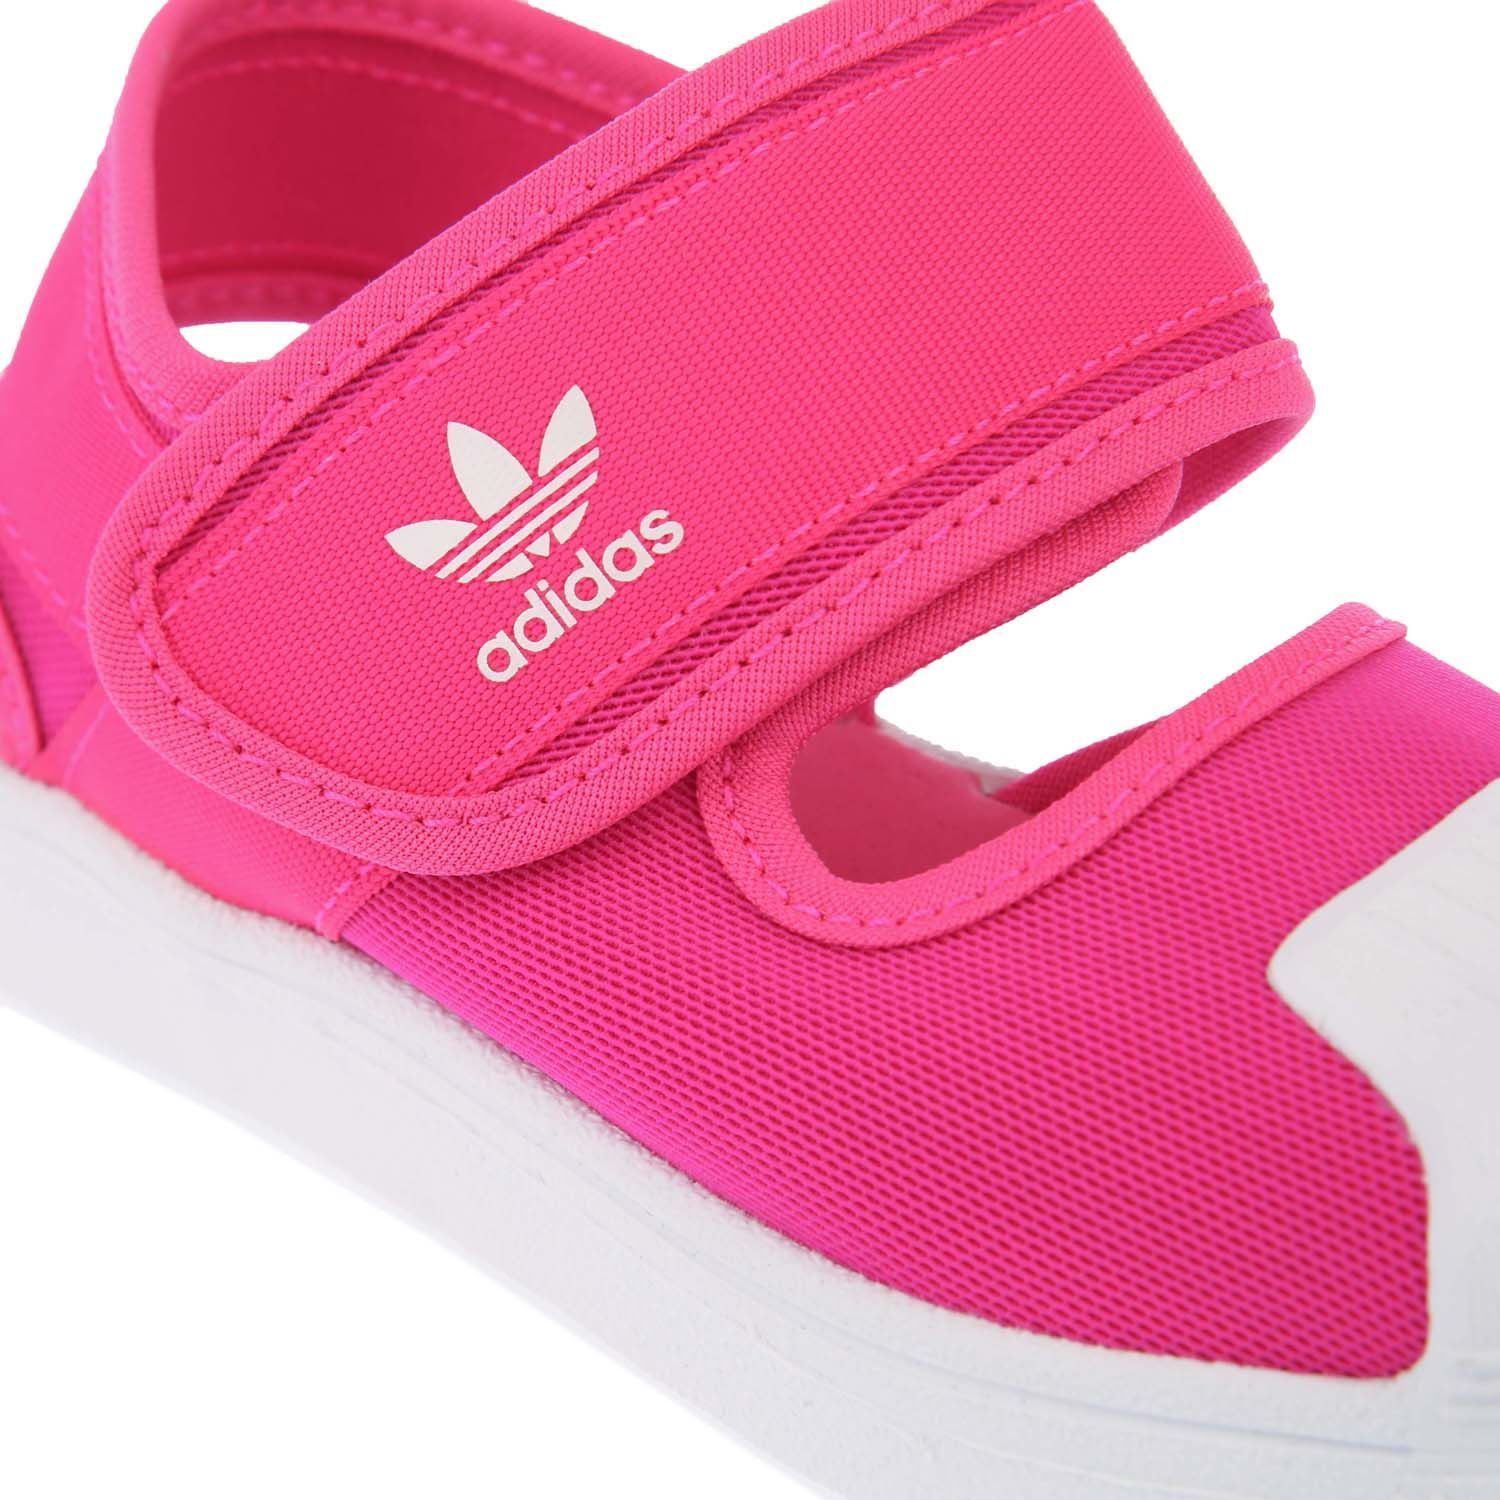 Childrens adidas Originals Superstar 360 Sandals in pink white.- Open mesh upper.- Hook-and-loop strap closure.- Adjustable strap.- Lightly cushioned footbed.- EVA outsole.- Rubber sole and shell toe.- Textile and Synthetic upper  Textile lining  Synthetic sole.- Ref.: FV7585C